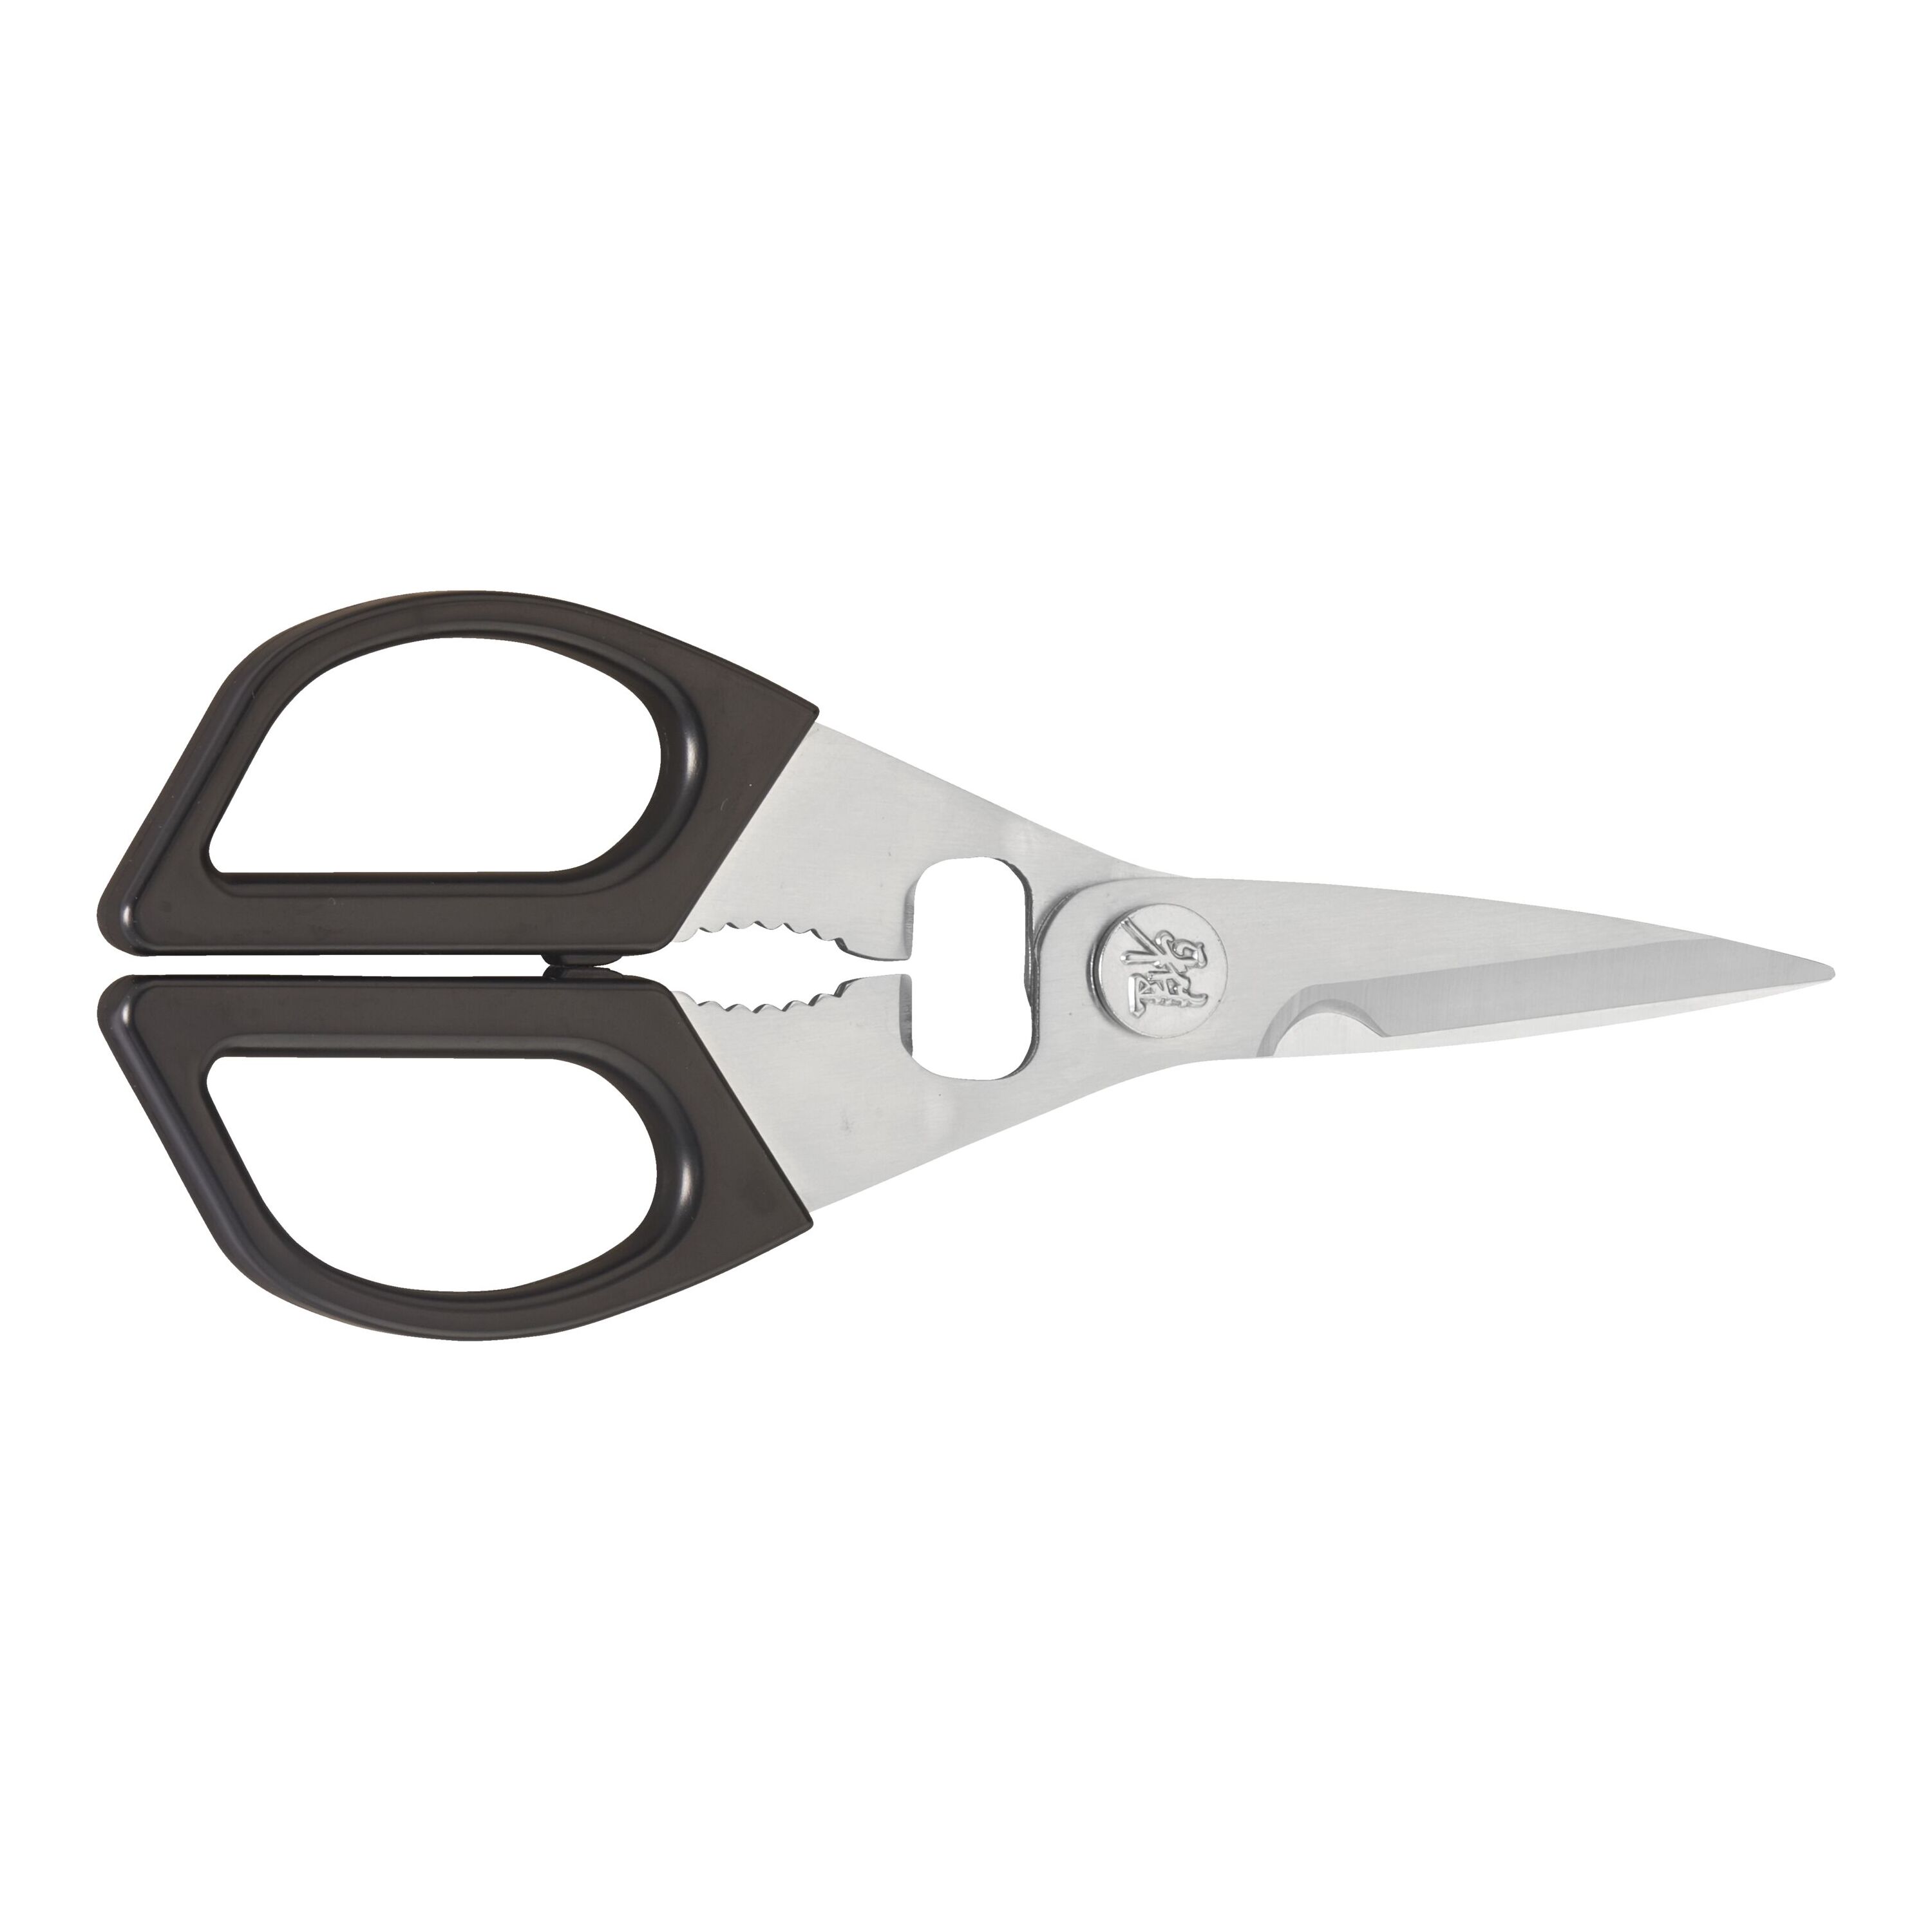 China Small Low Cost Children Scissors Manufacturers and Suppliers